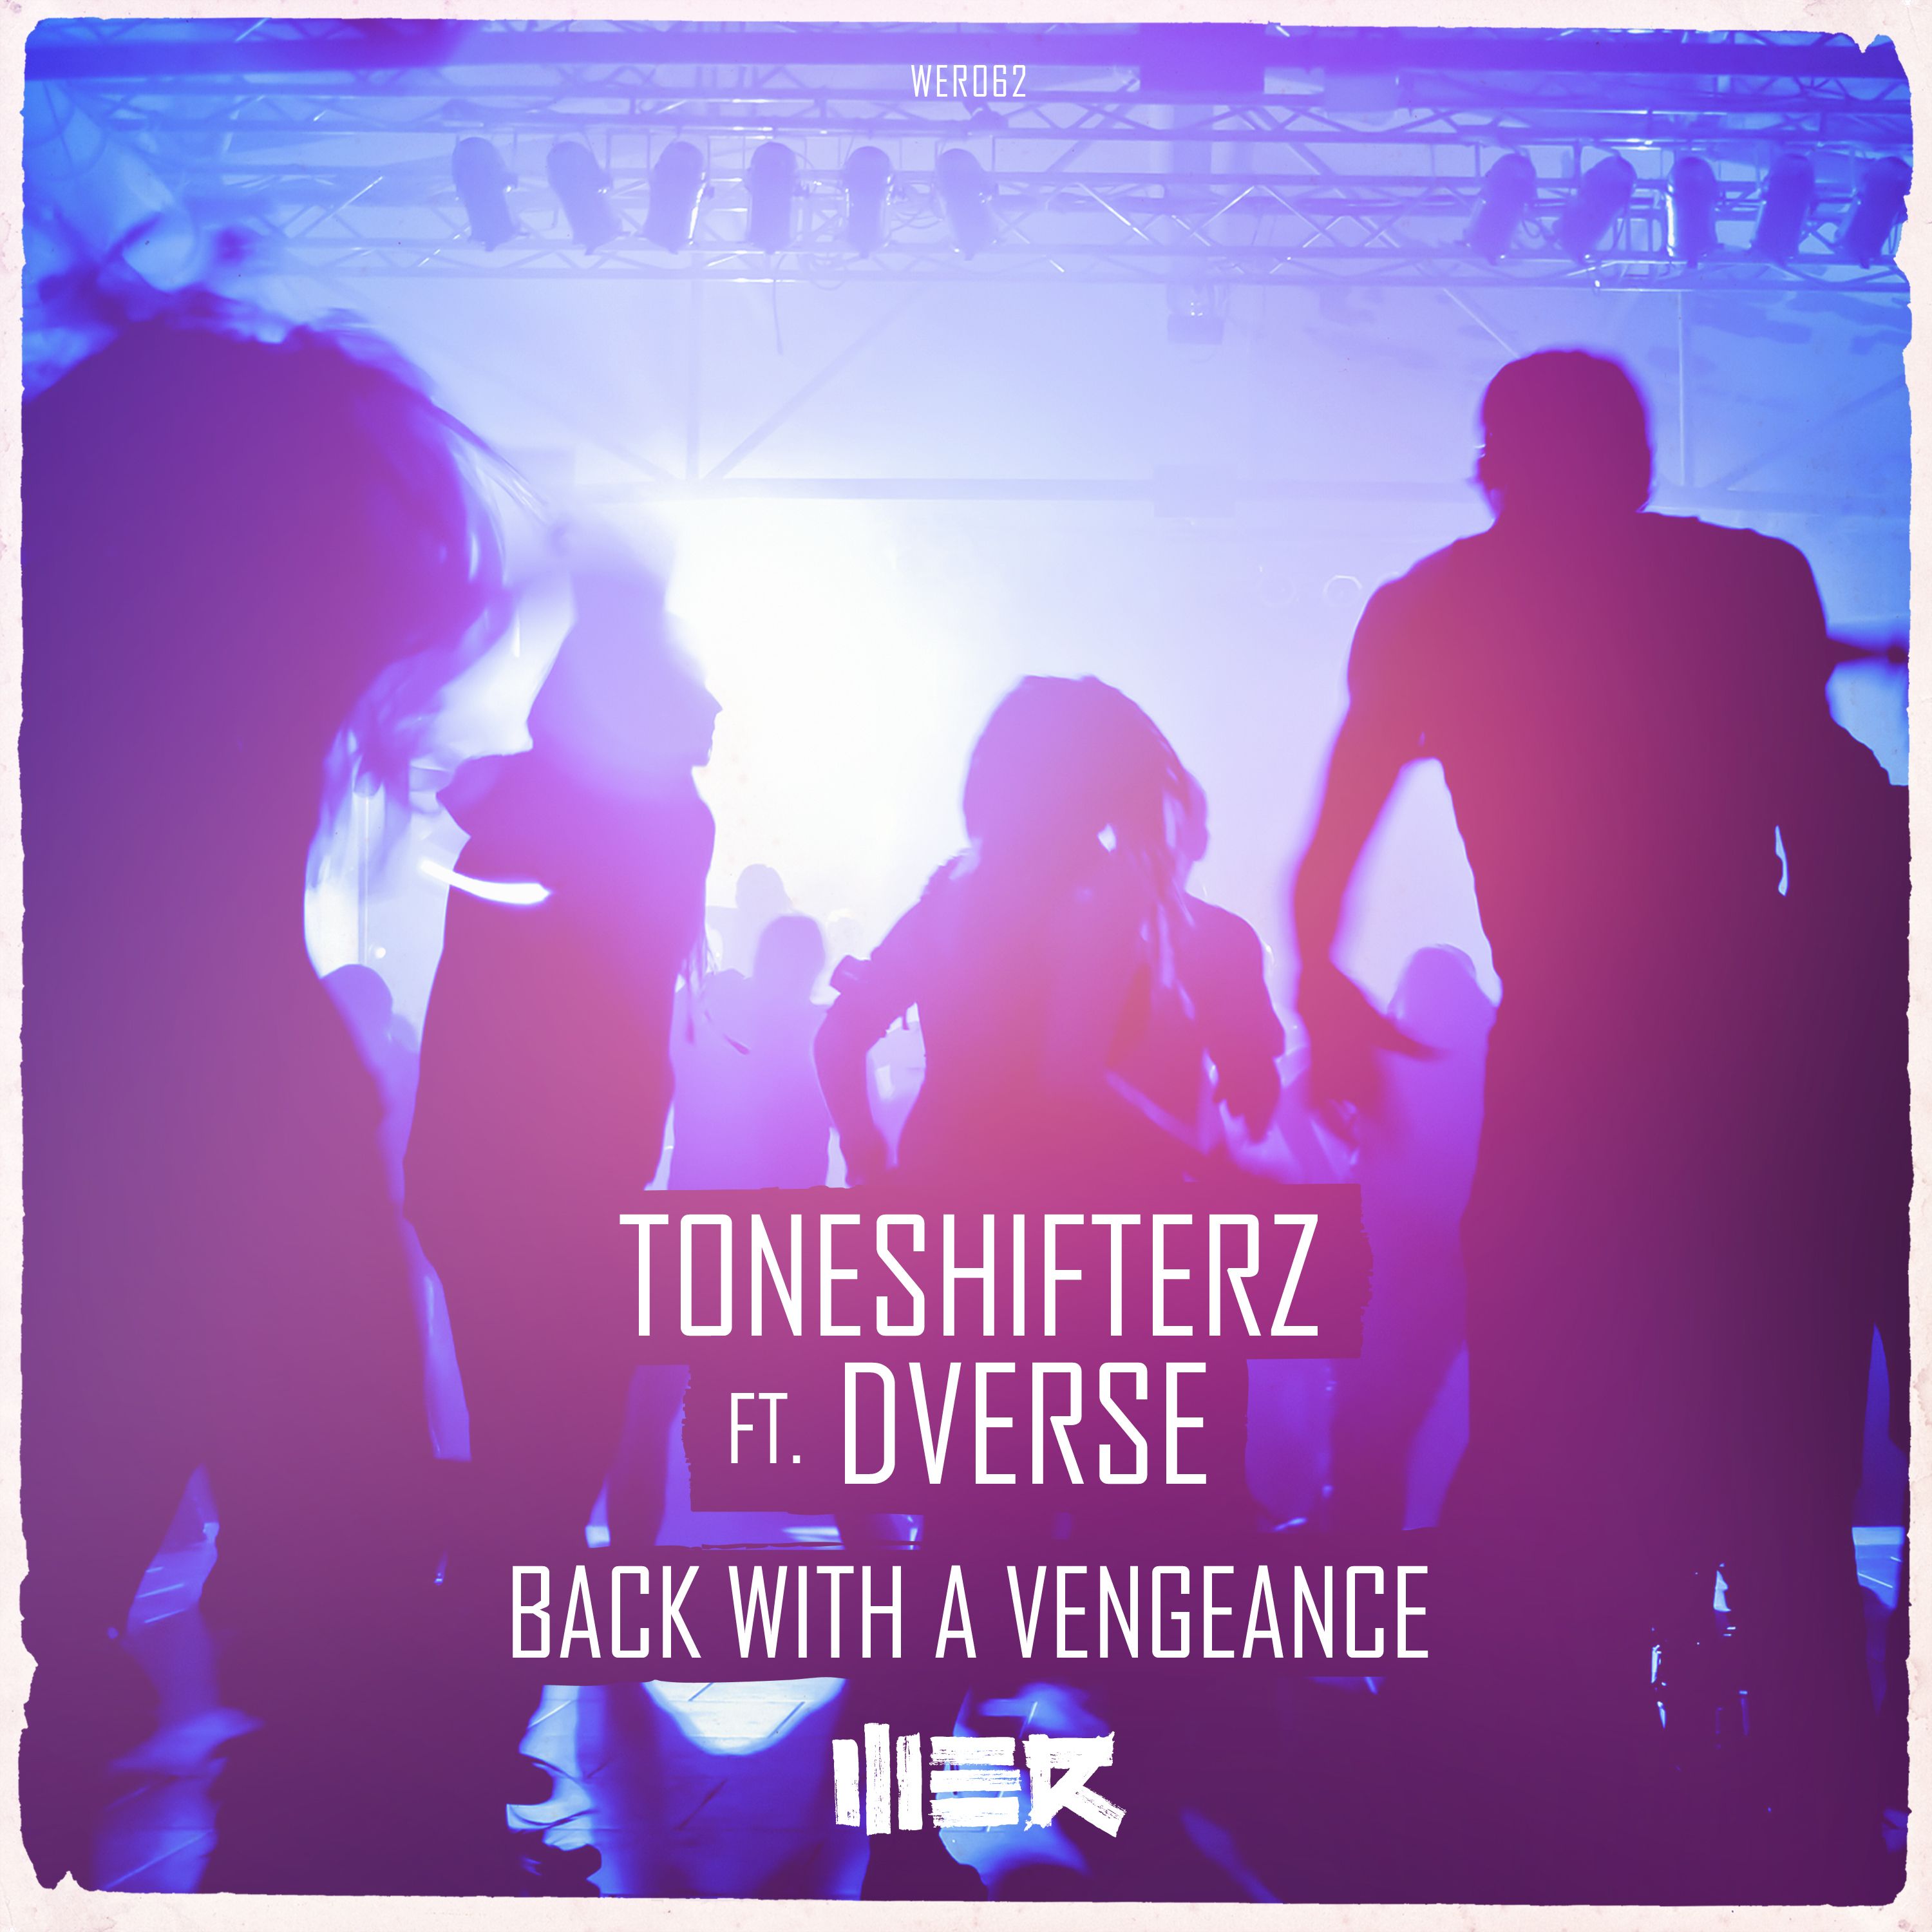 Toneshifterz Feat. DVERSE - Back With A Vengeance [WE R] WER062